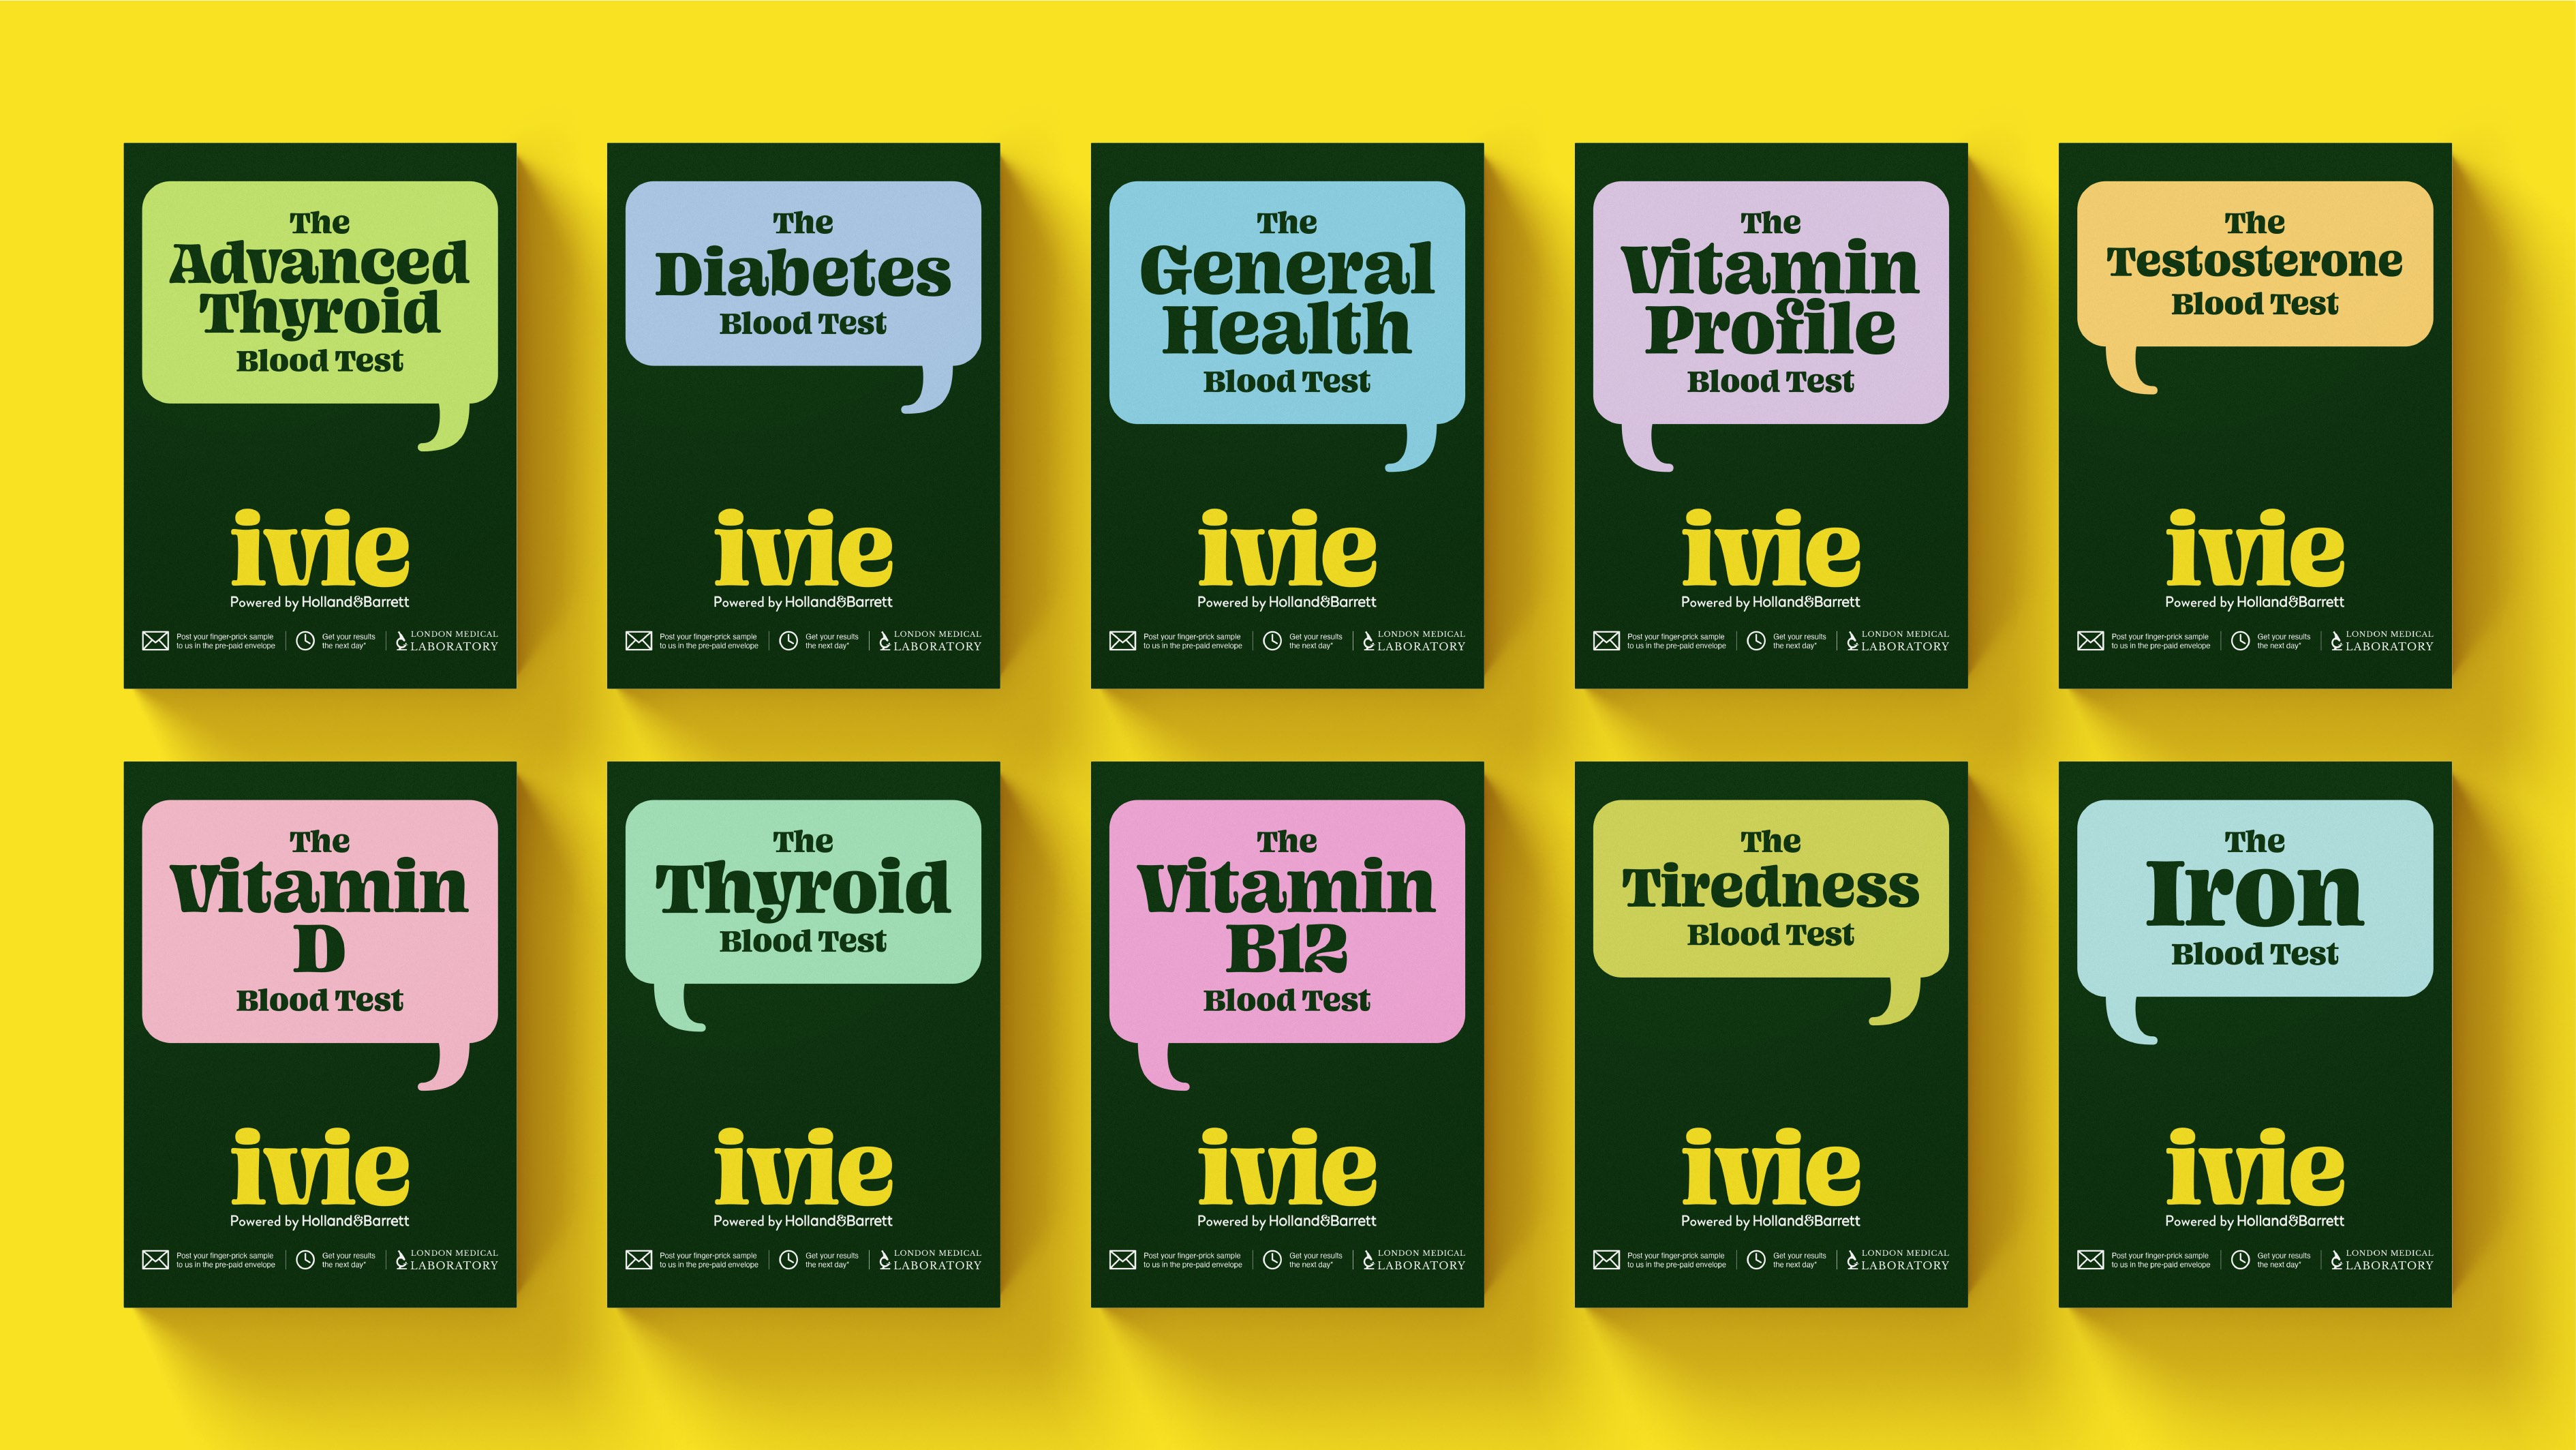 Ivie by Holland & Barrett Visual Identity, Health Redefining Supportive Health Testing with a Human Touch Designed by Derek&Eric